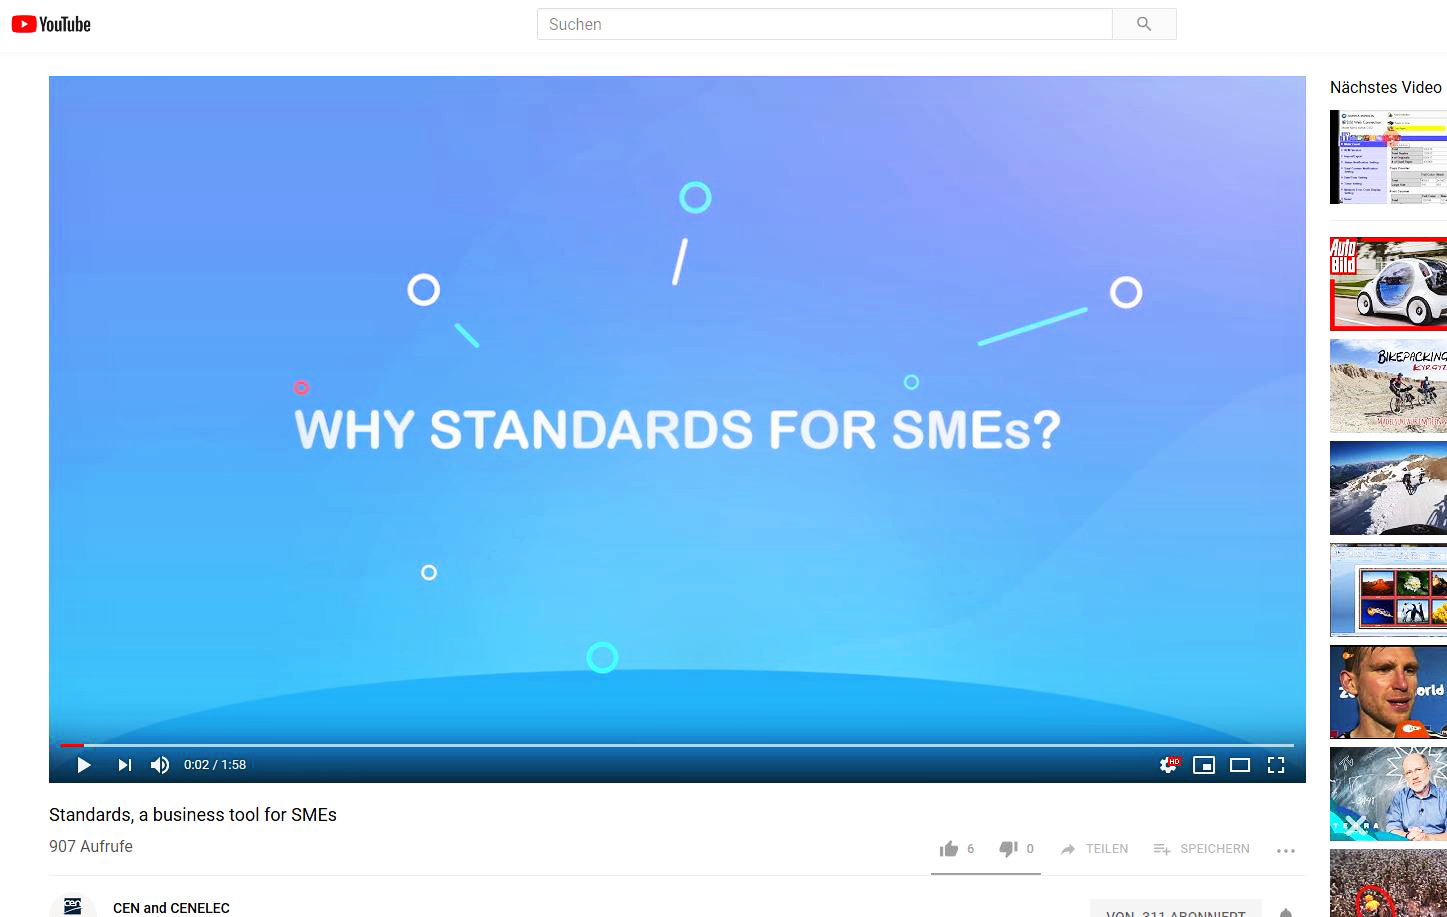 Standards for SMEs - Youtube Video